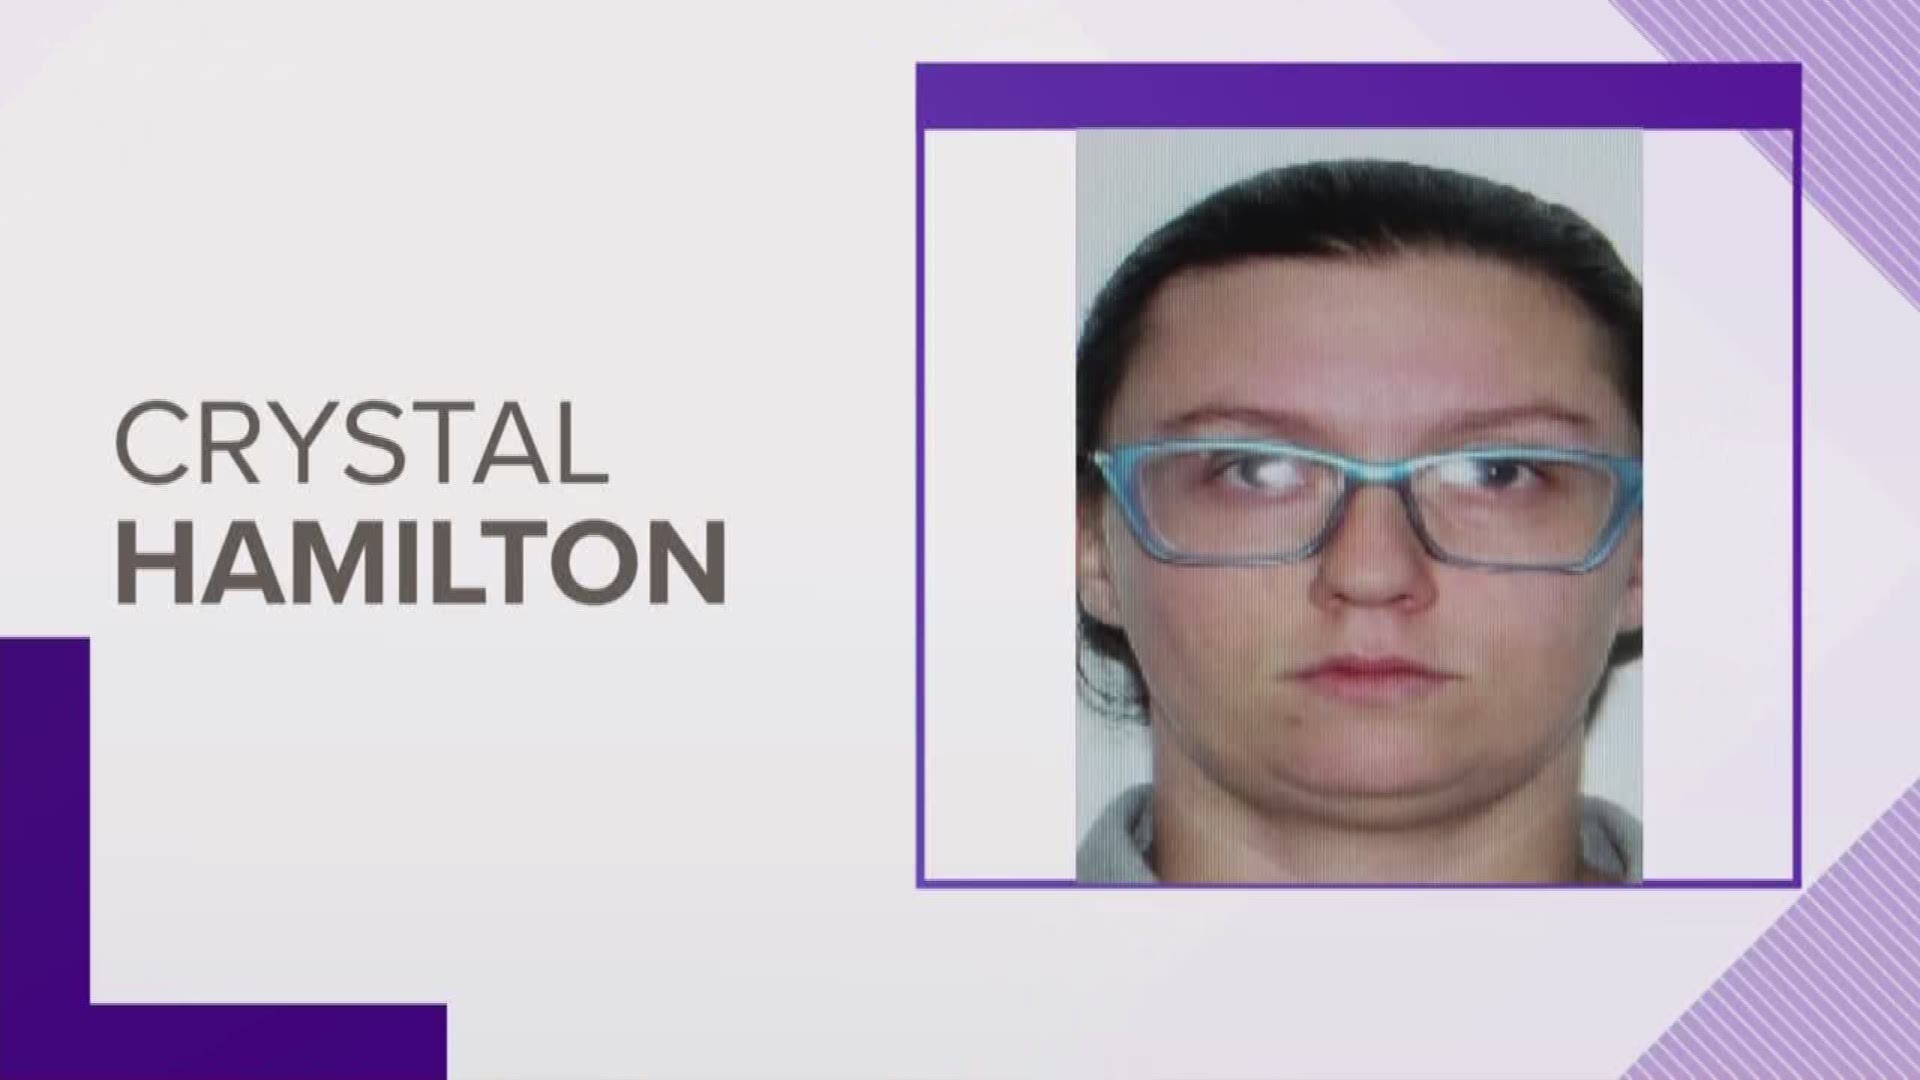 Williamsburg police said they responded to the room for noise complaints and then later for gunshots. A woman was  found dead inside the room and now police are searching for the suspect, Crystal Hamilton.